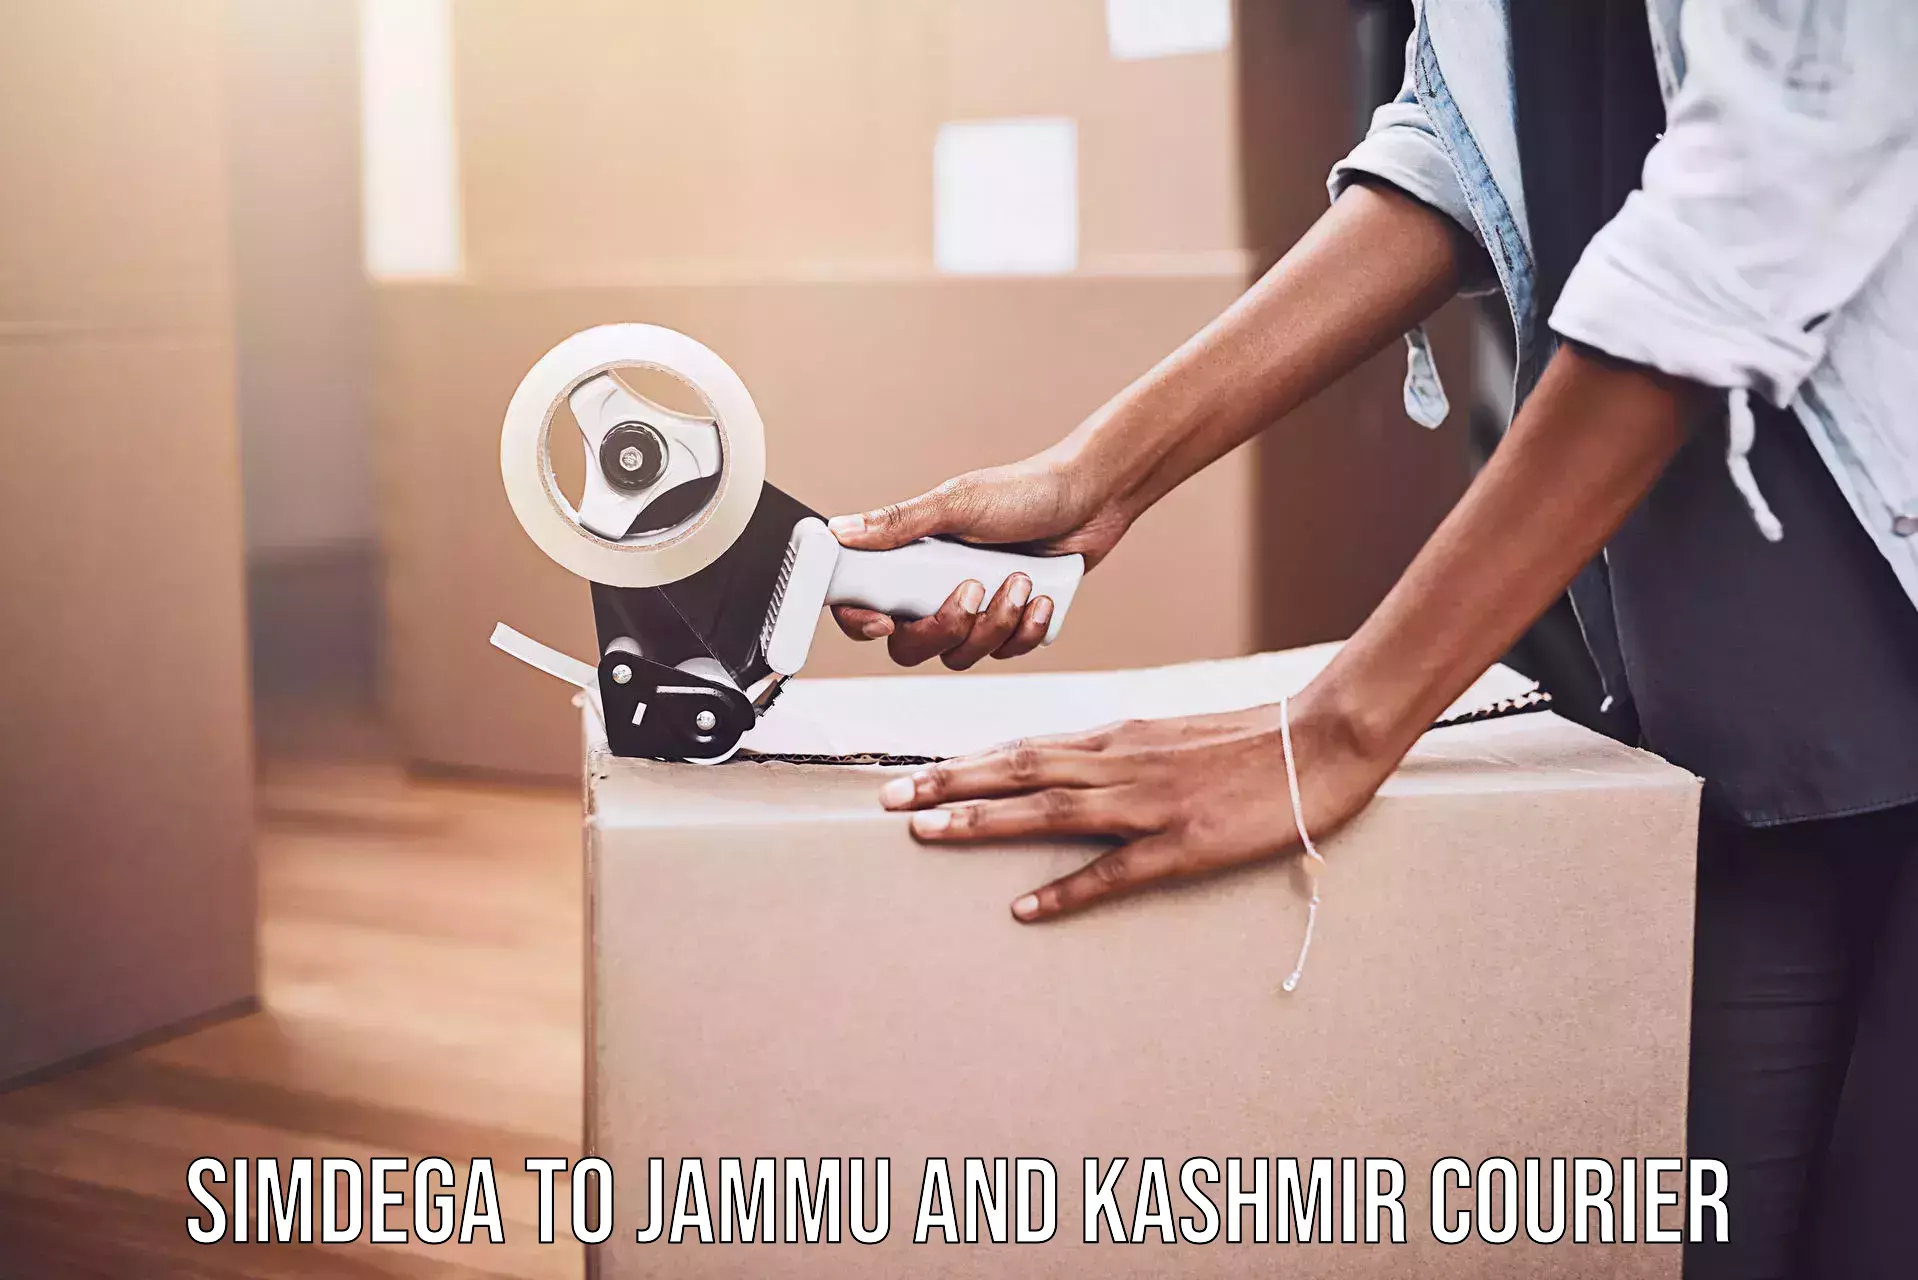 Local delivery service Simdega to Jammu and Kashmir